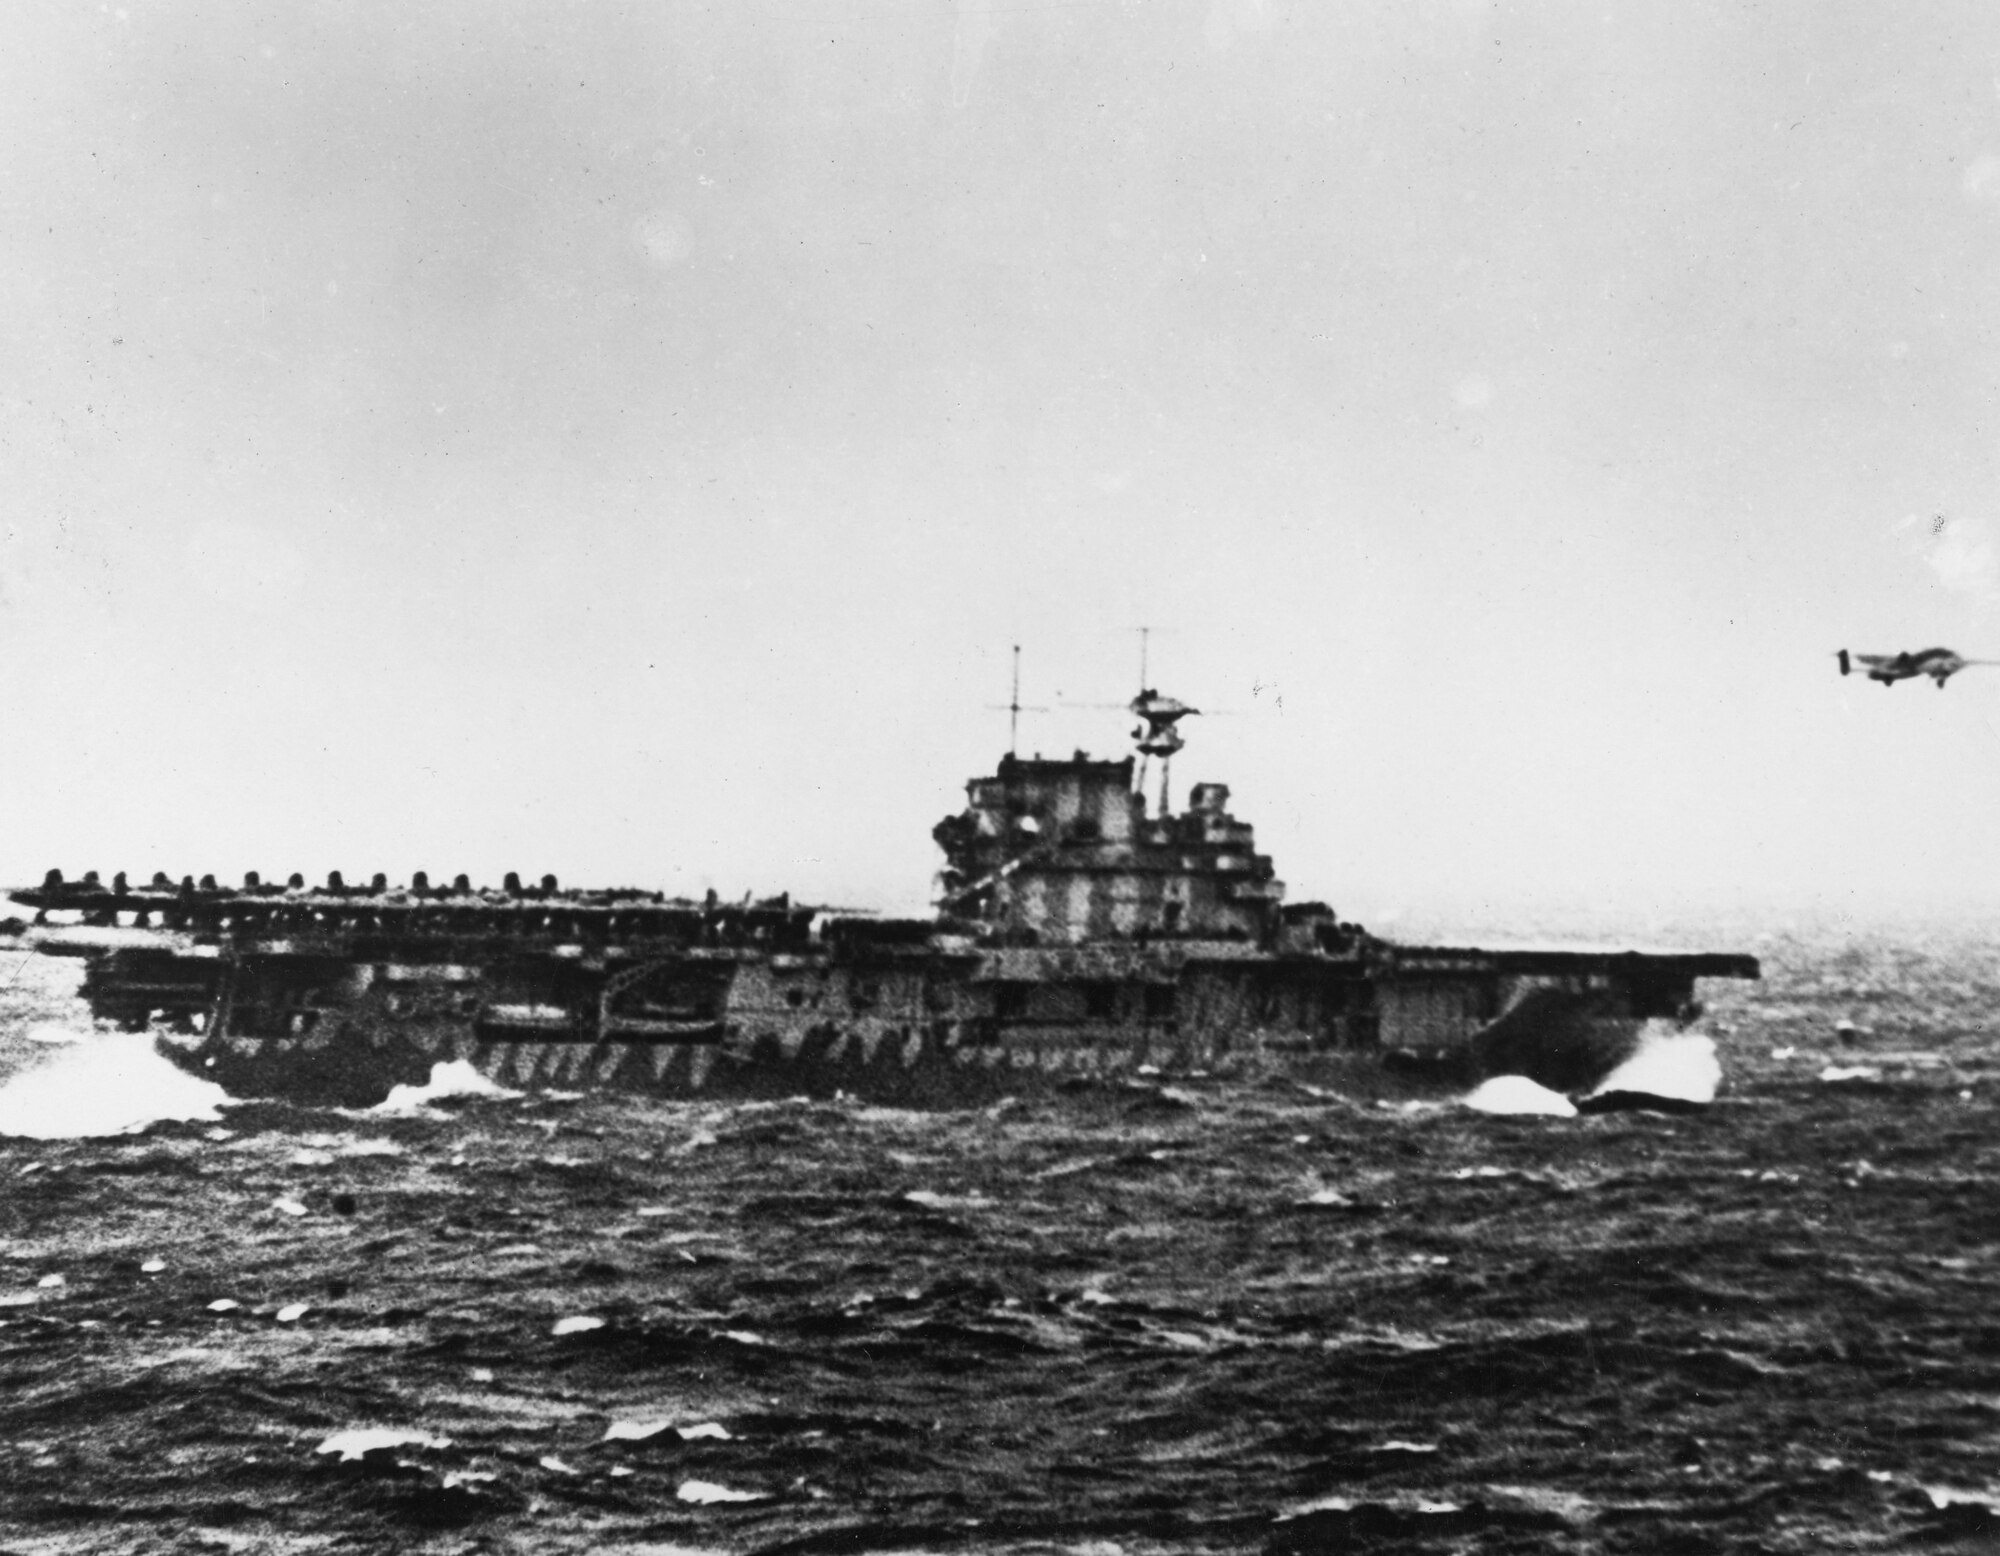 USS HORNET, PACIFIC OCEAN 1942 -- Lt. Col. James "Jimmy" Doolittle takes off from the USS Hornet 650 miles from Japan on a top-secret bombing mission. The Doolittle Raid, U.S. Army Air Force special order #1 of World War II, was a daring one-way mission of 16 B-25 Mitchell medium bombers with 80 aircrew, commanded by Colonel Doolittle, to carry out America's first offensive attack on Japan. The crews secretly trained for two-weeks and modified the B-25s at Eglin Air Force Base's Wagner Field, Auxiliary Field 1 prior to the mission. (Photo courtesy National Museum of the U.S. Air Force)  